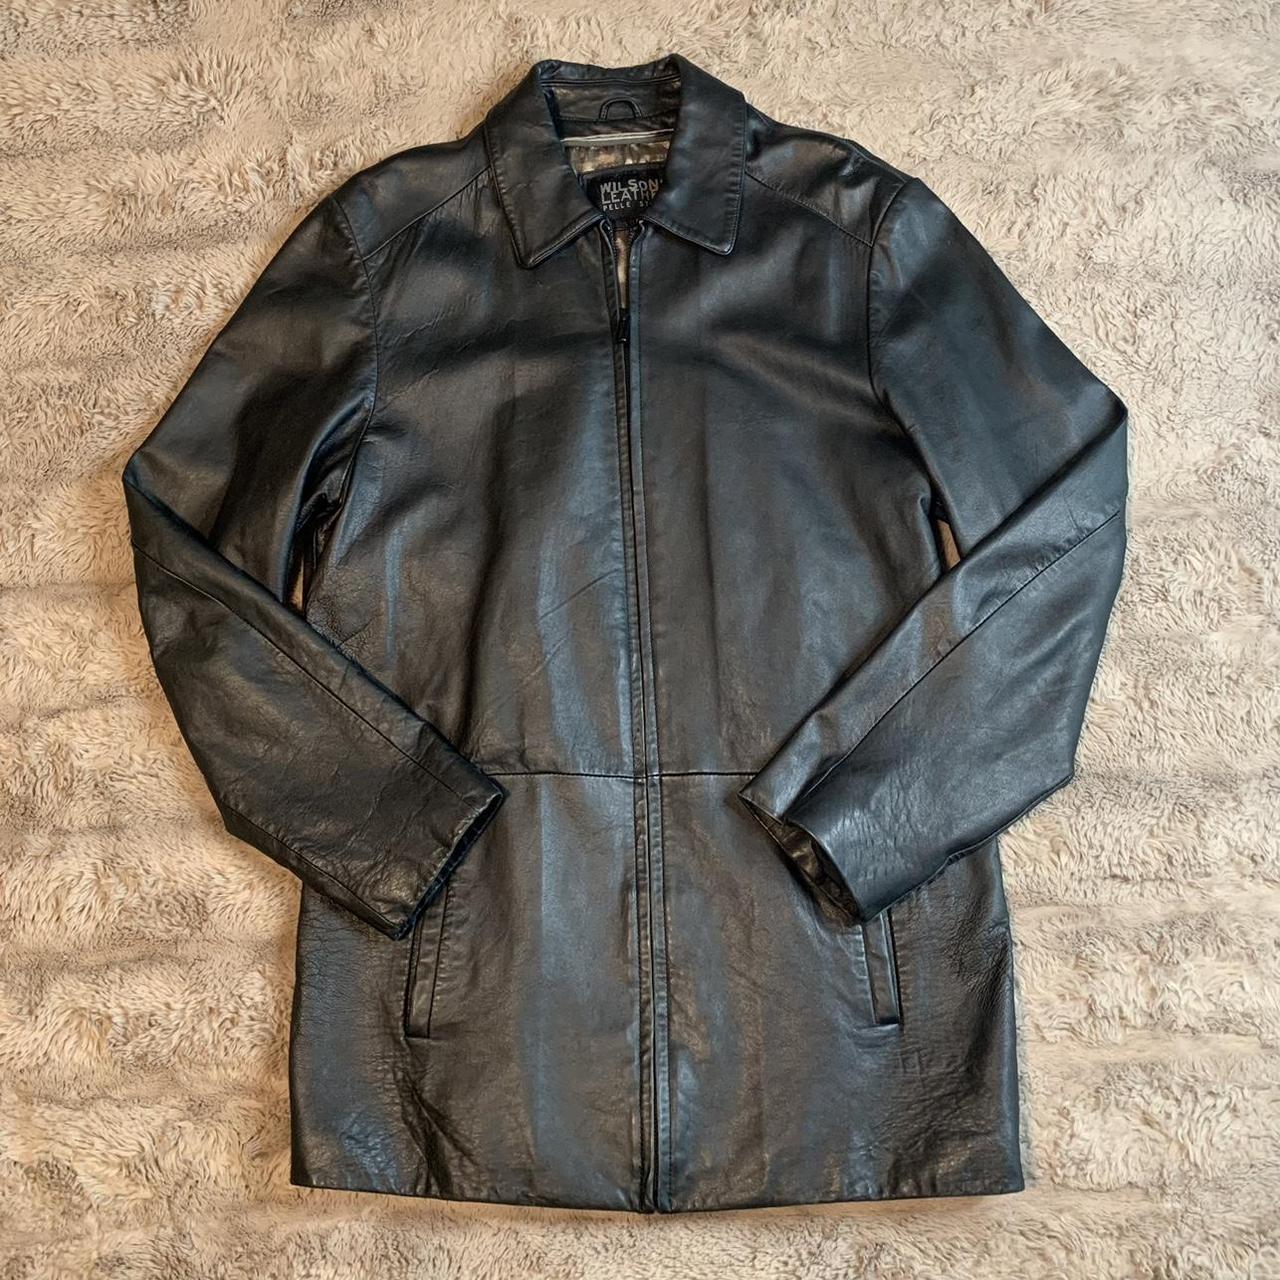 Wilson’s Leather Men's Black and Grey Jacket (2)